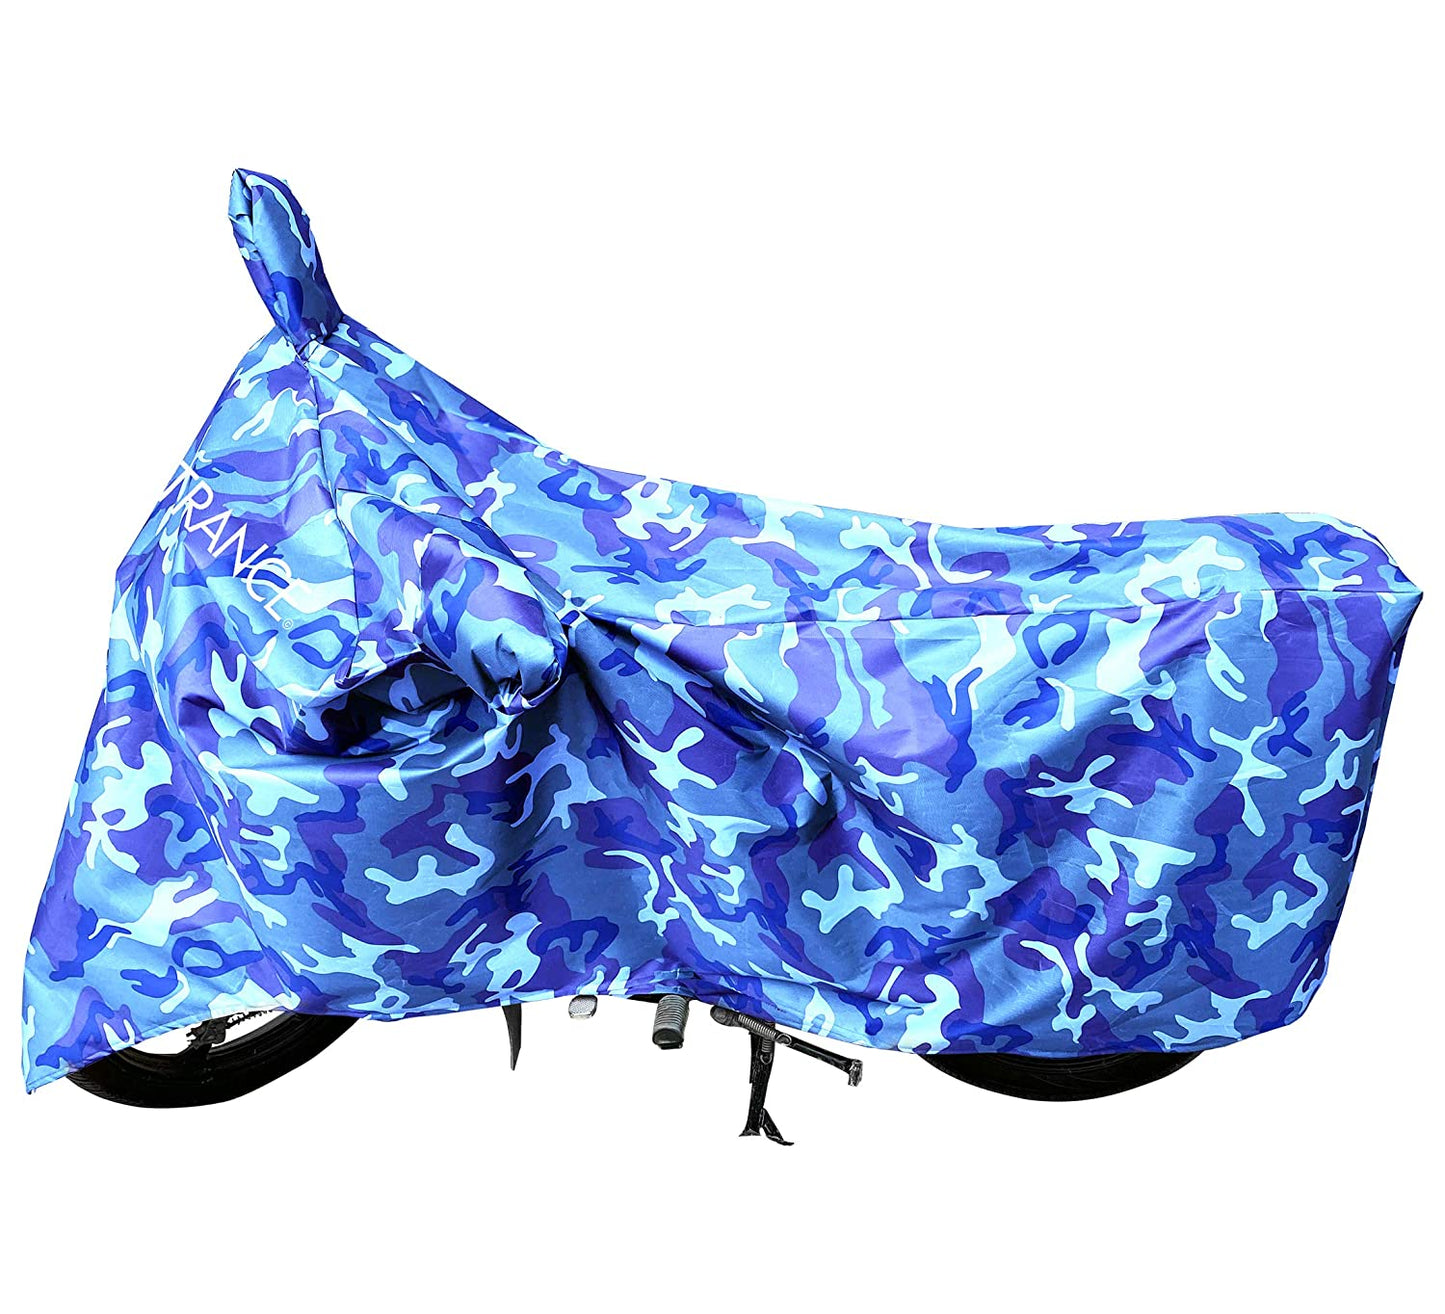 MotoTrance Jungle Bike Body Covers For TVS Apache RTR 160 - Interlock-Stitched Waterproof and Heat Resistant with Mirror Pockets